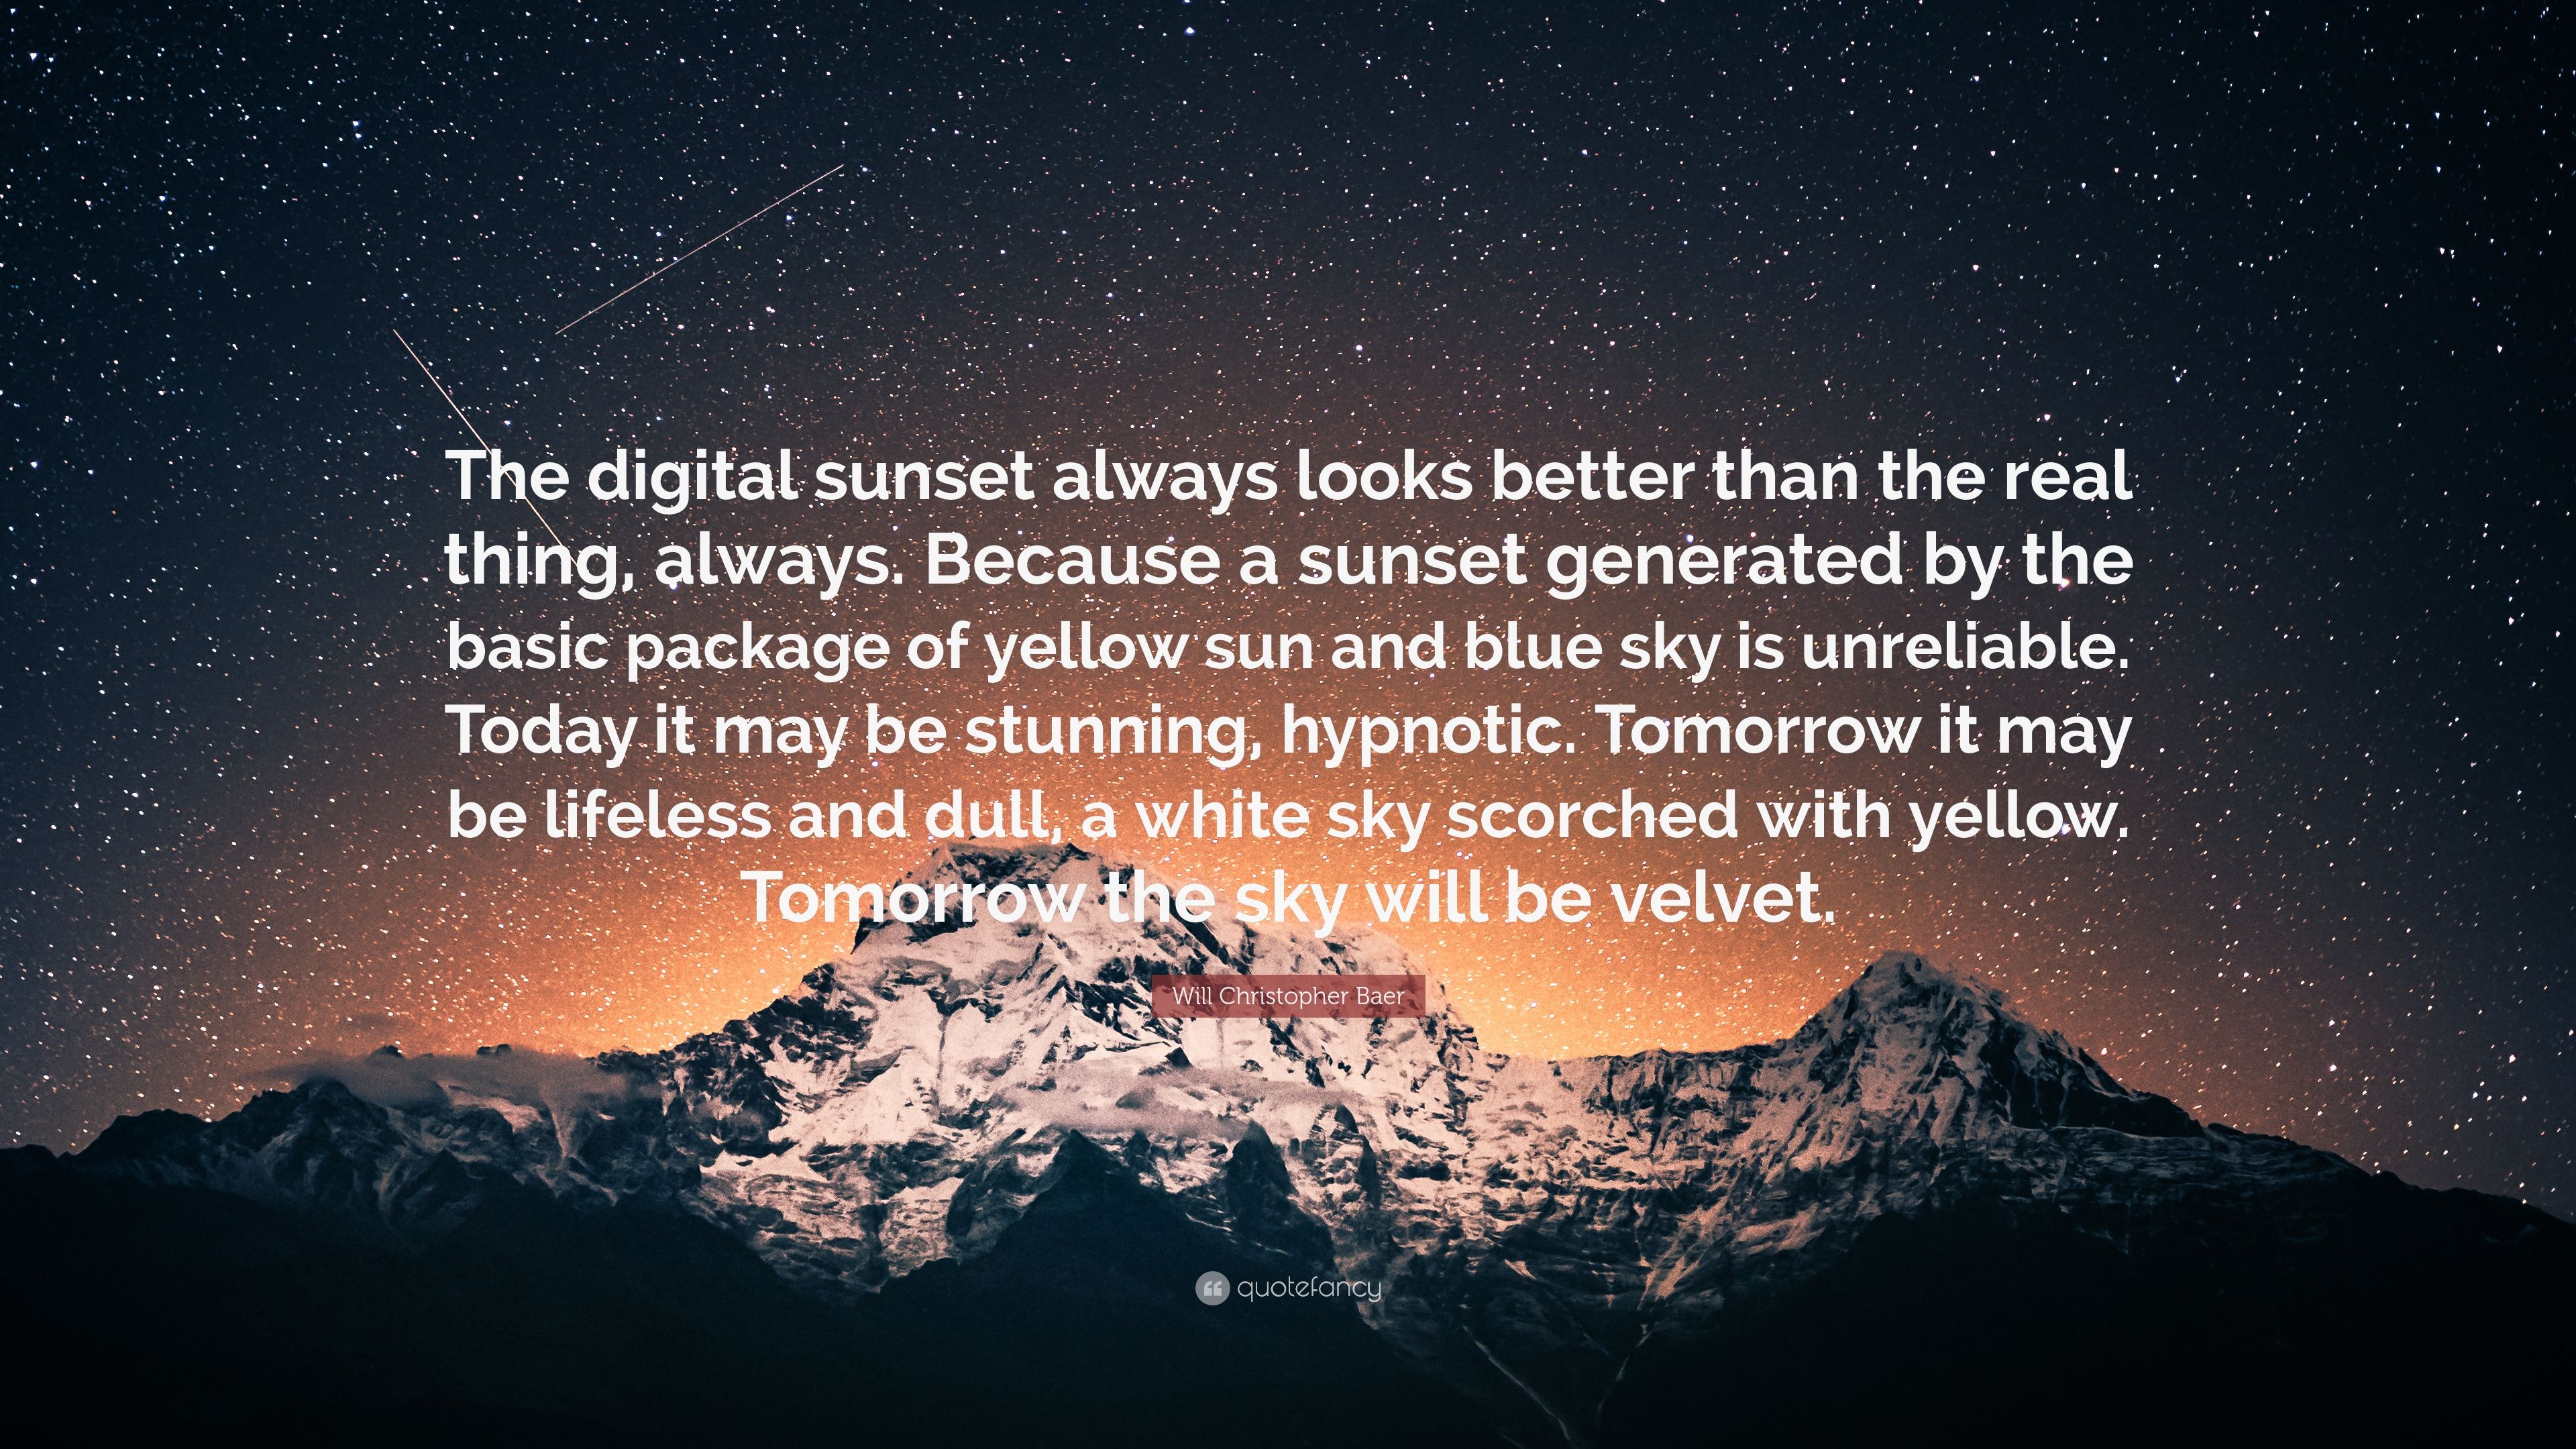 Will Christopher Baer Quote: “The digital sunset always